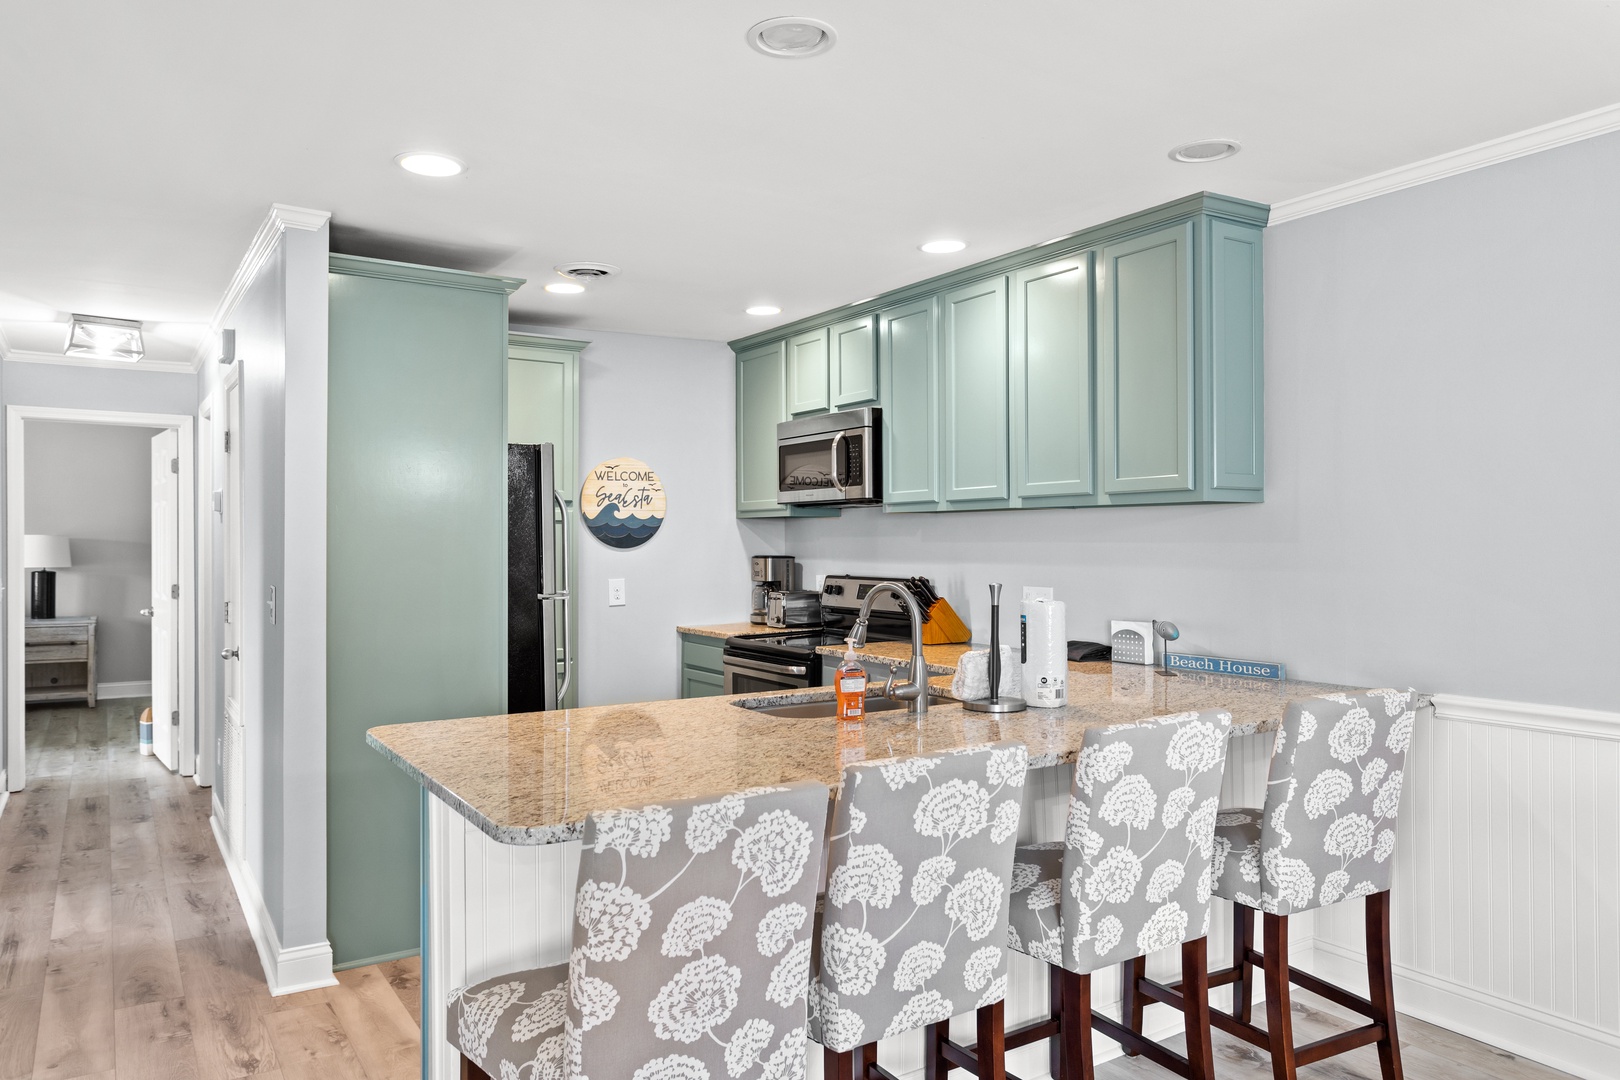 The well-stocked kitchen with countertop seating for 4